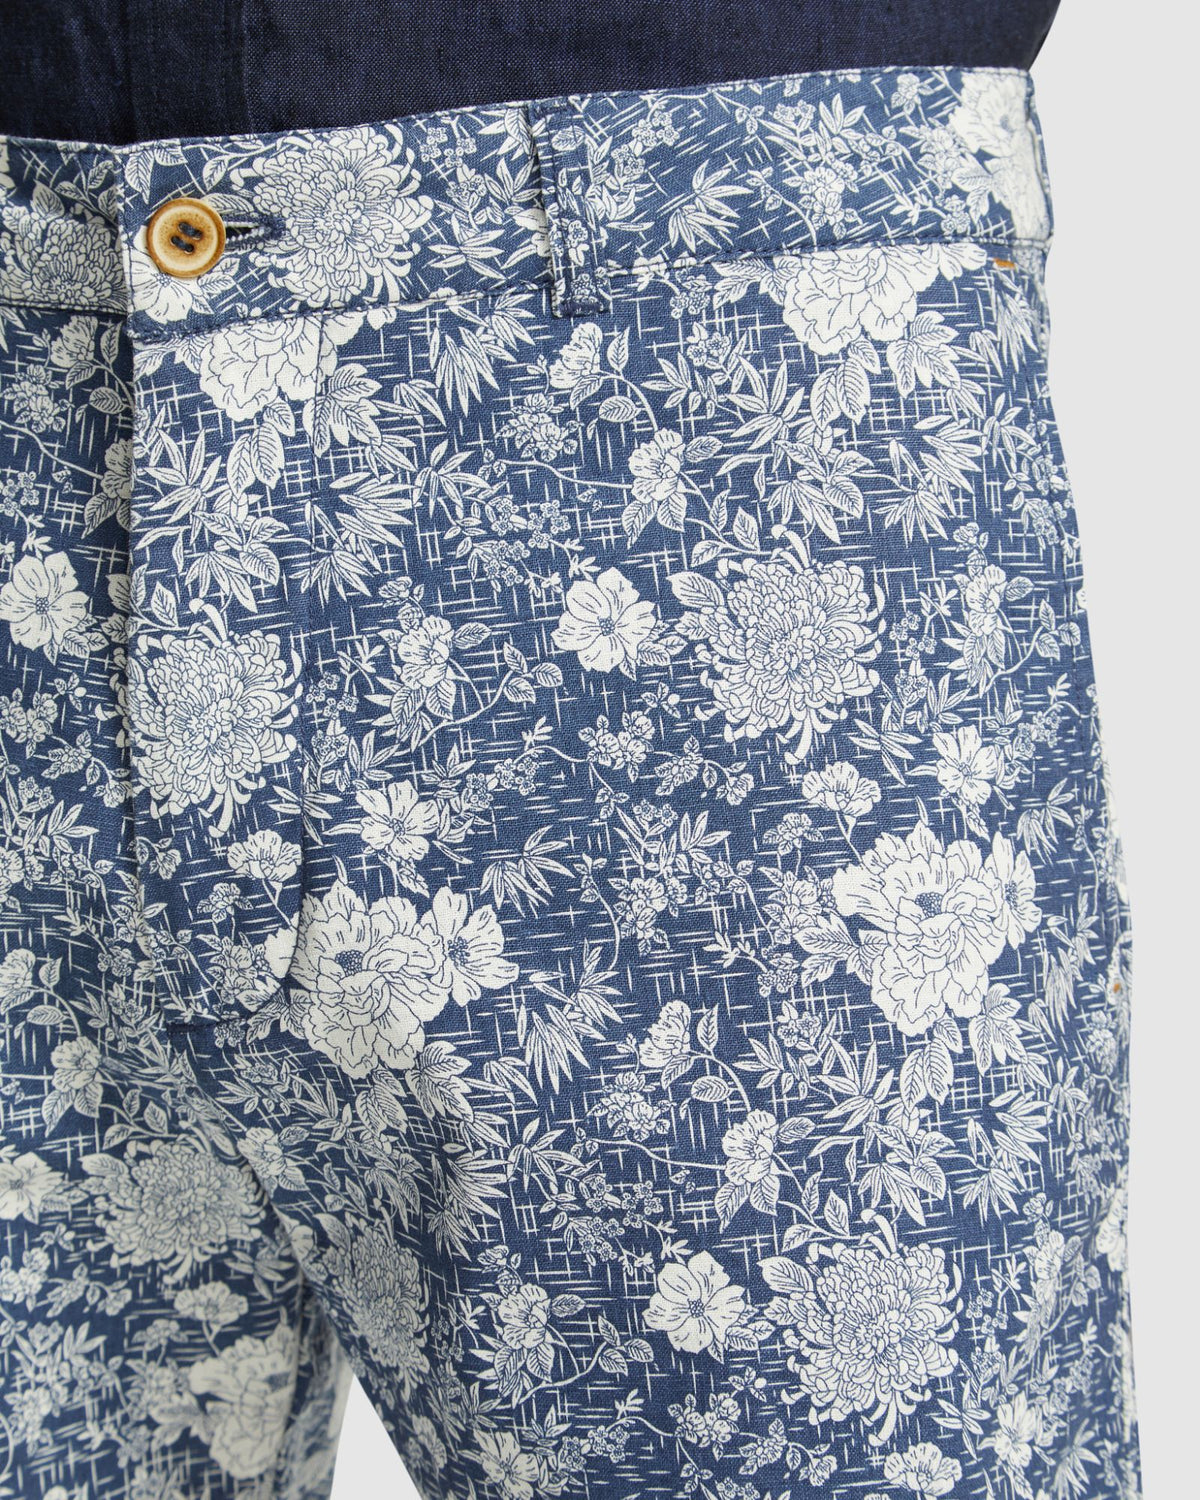 TOM LINEN COTTON PRINTED SHORT - AVAILABLE ~ 1-2 weeks MENS SHORTS